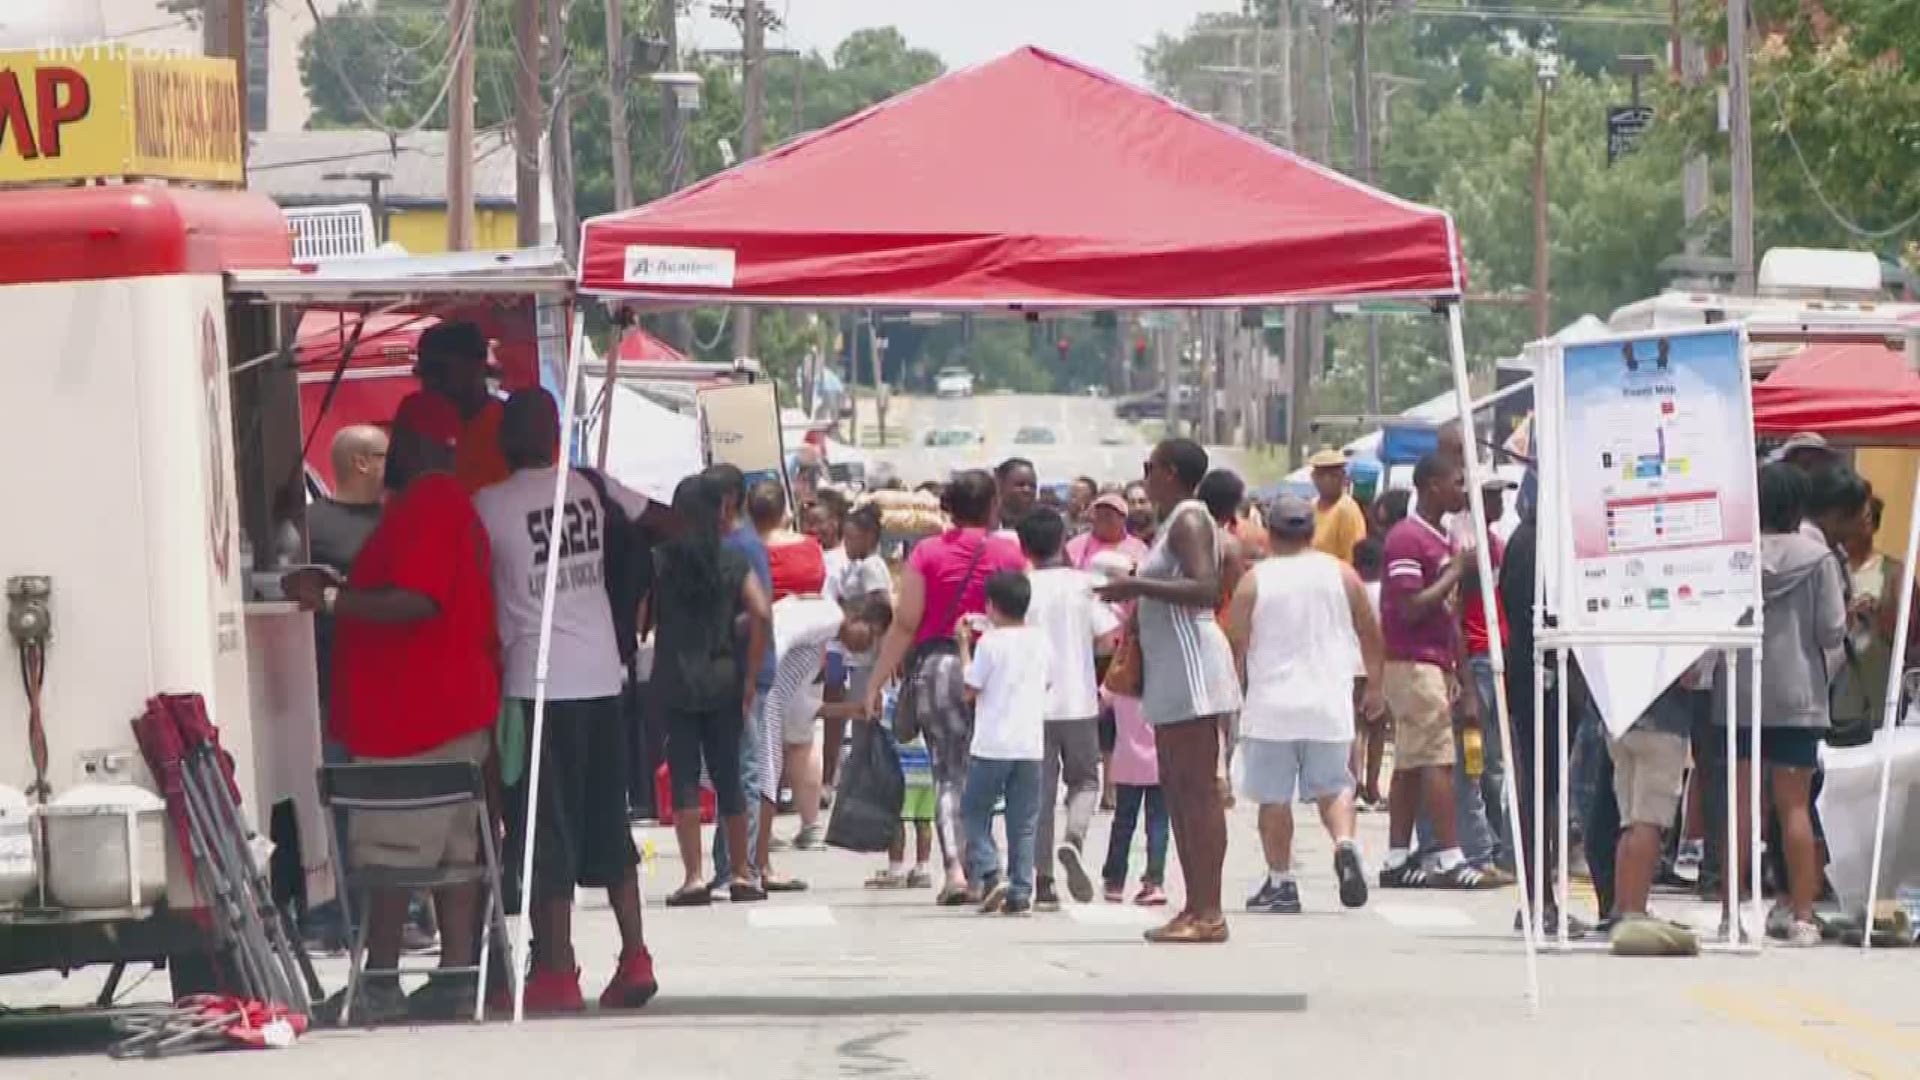 A busy day in downtown Little Rock with lots of people celebrating 'Juneteenth!'